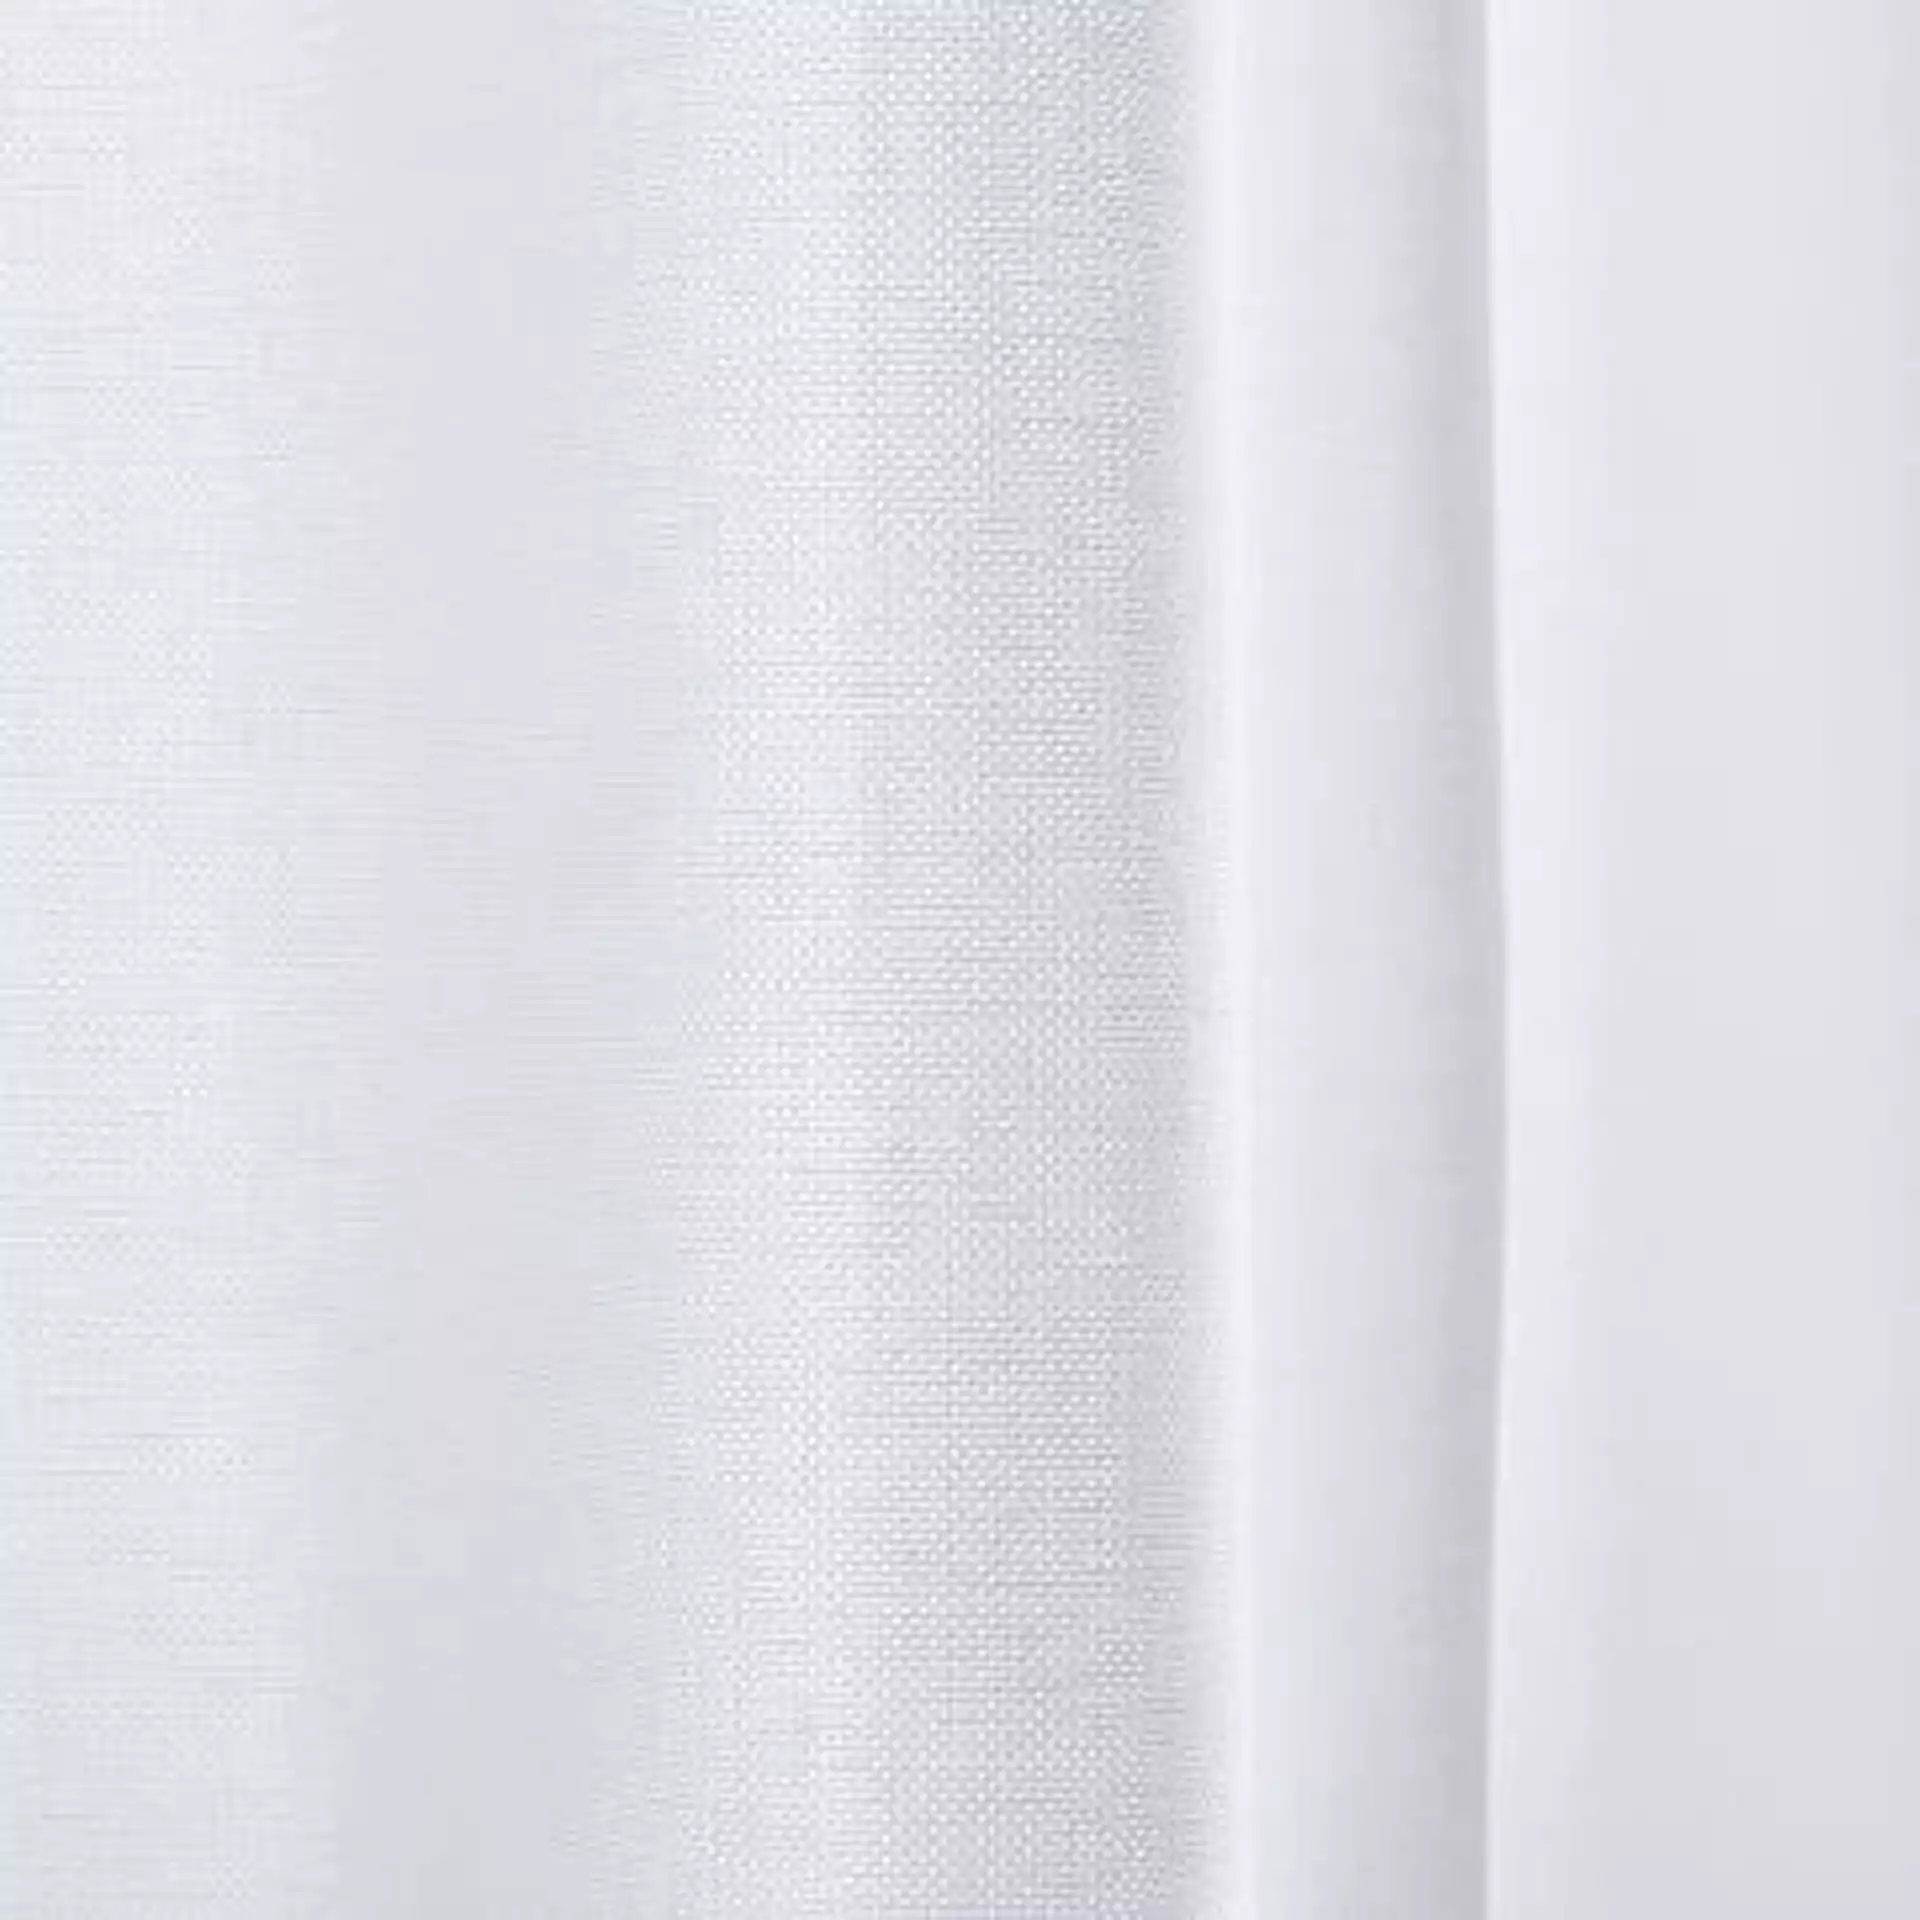 Cotton Canvas Curtain with Cotton Lining, White, 48"x84", Set of 2